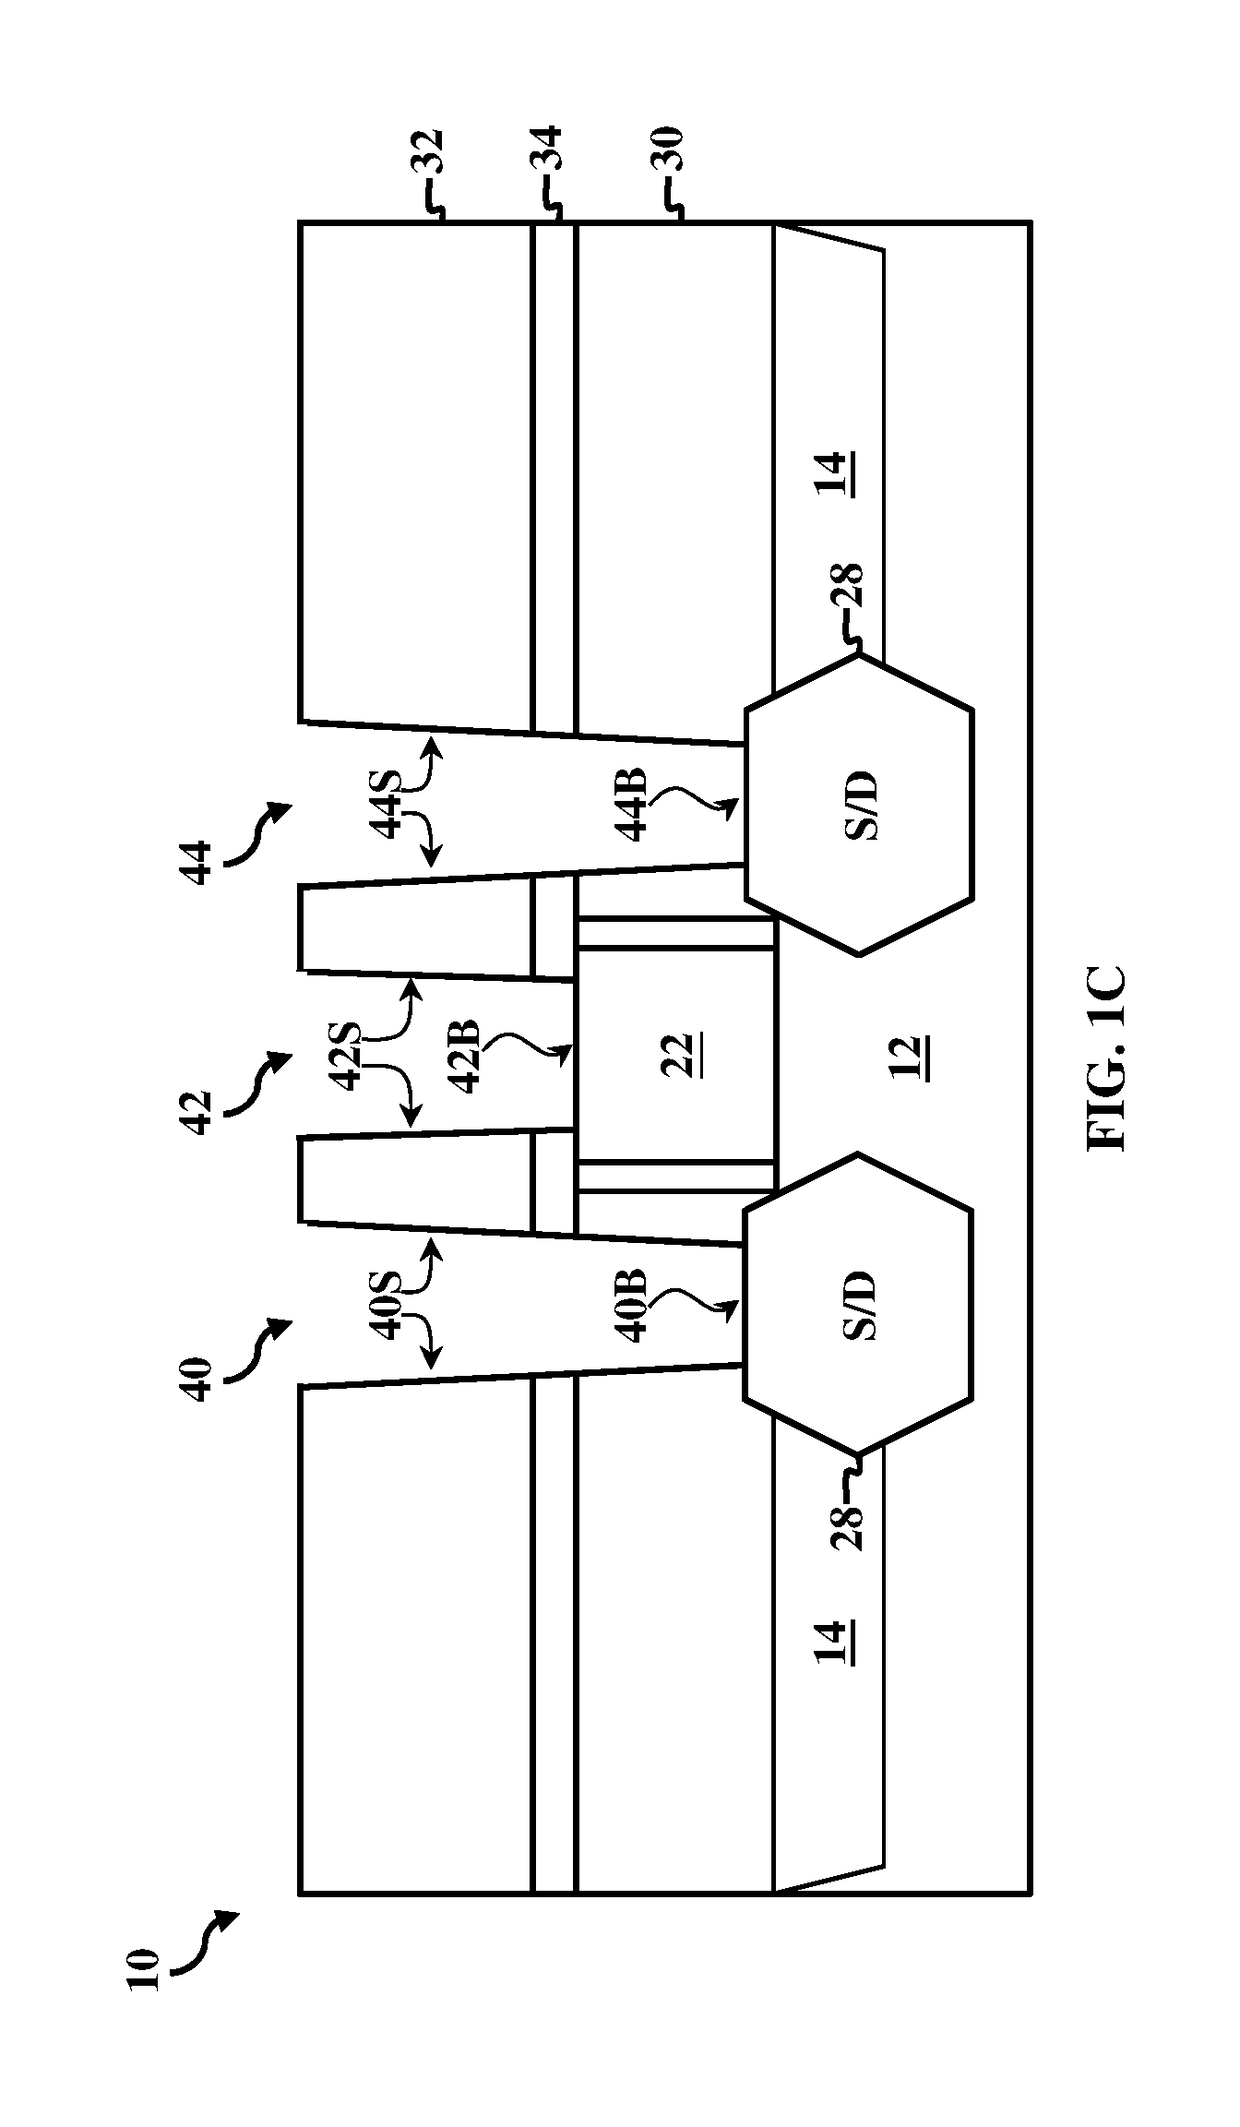 Atomic layer deposition based process for contact barrier layer